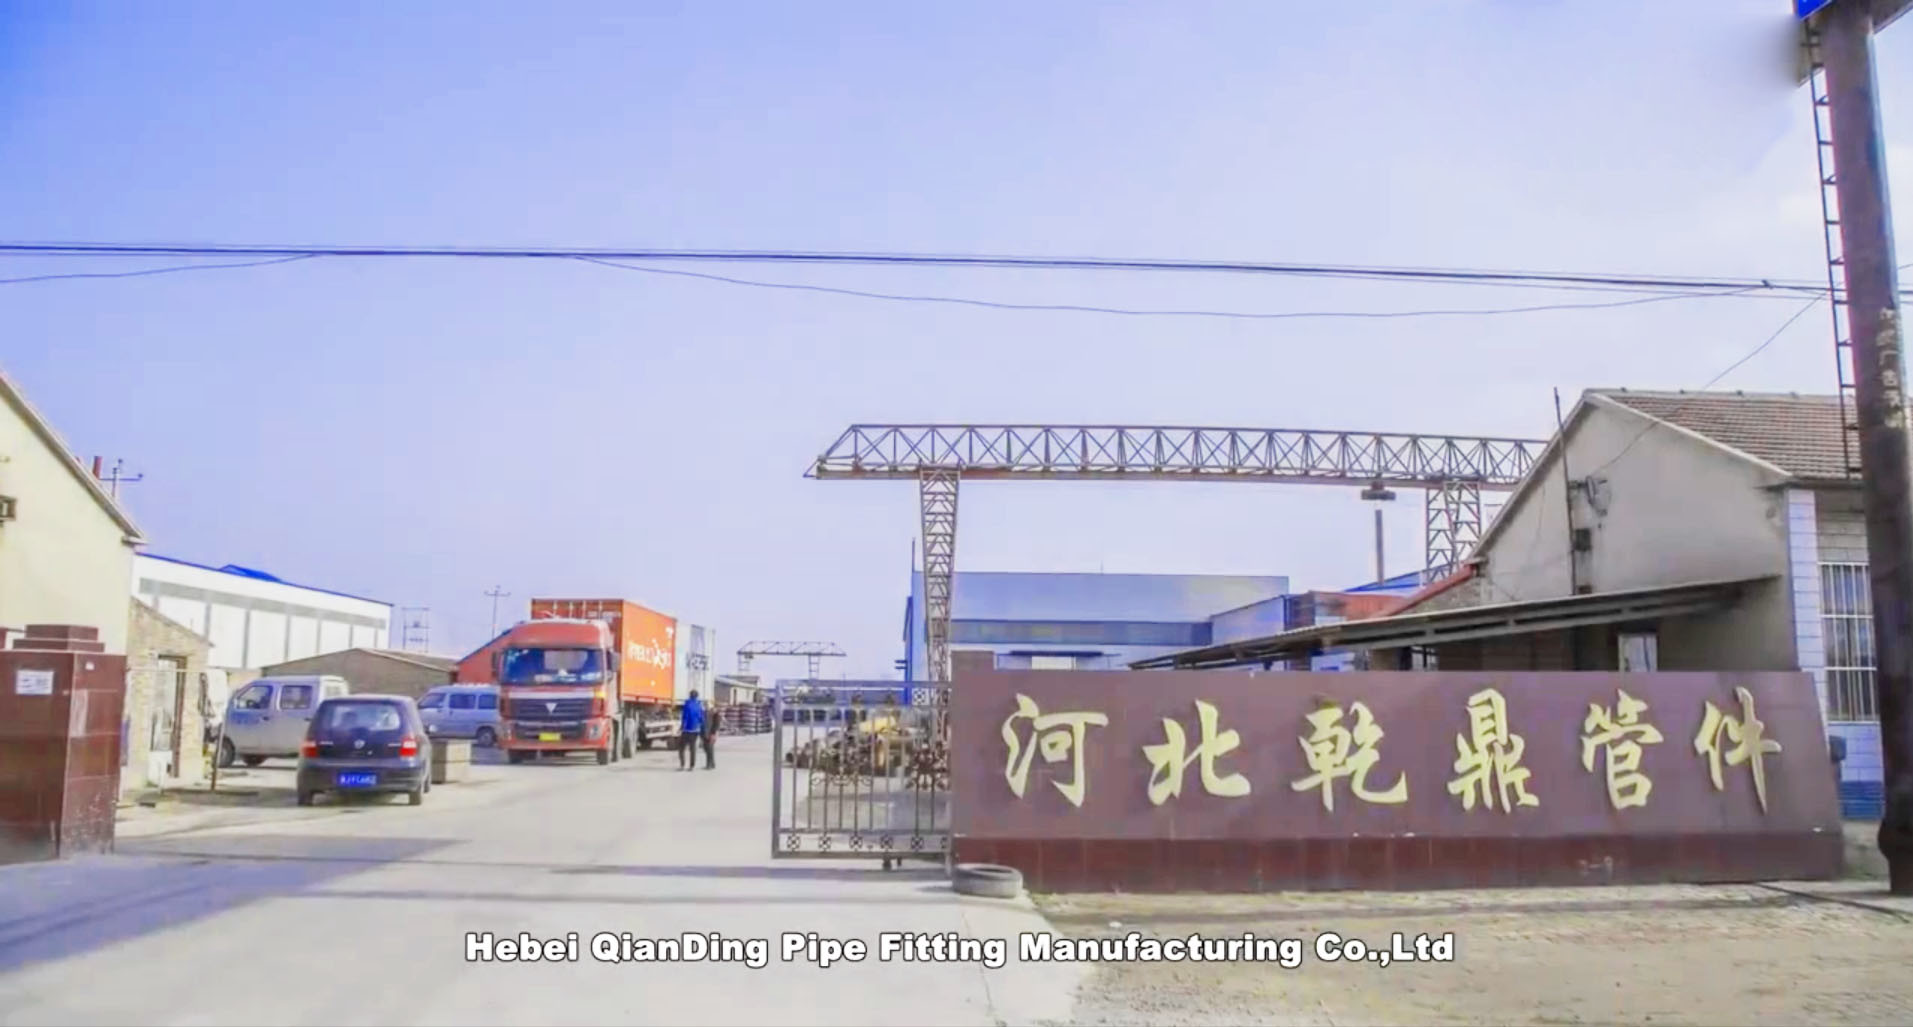 China Hebei Qianding Pipe Fitting Manufacturing Co., Ltd. company profile